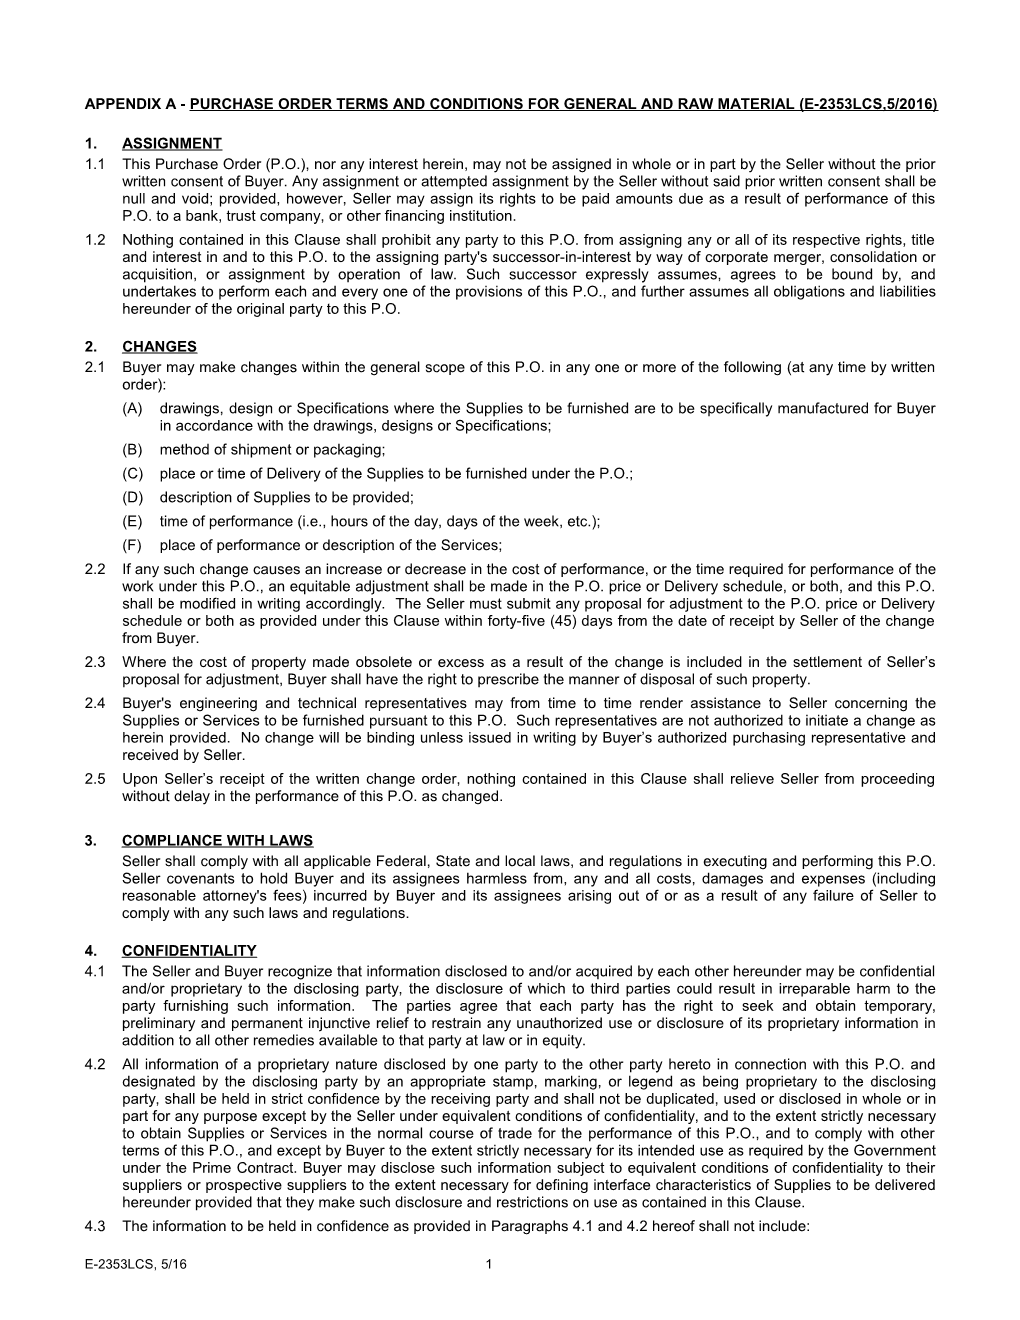 Appendix a - Purchase Order Terms and Conditions for General and Raw Material (E-2353Lcs, 12/06)